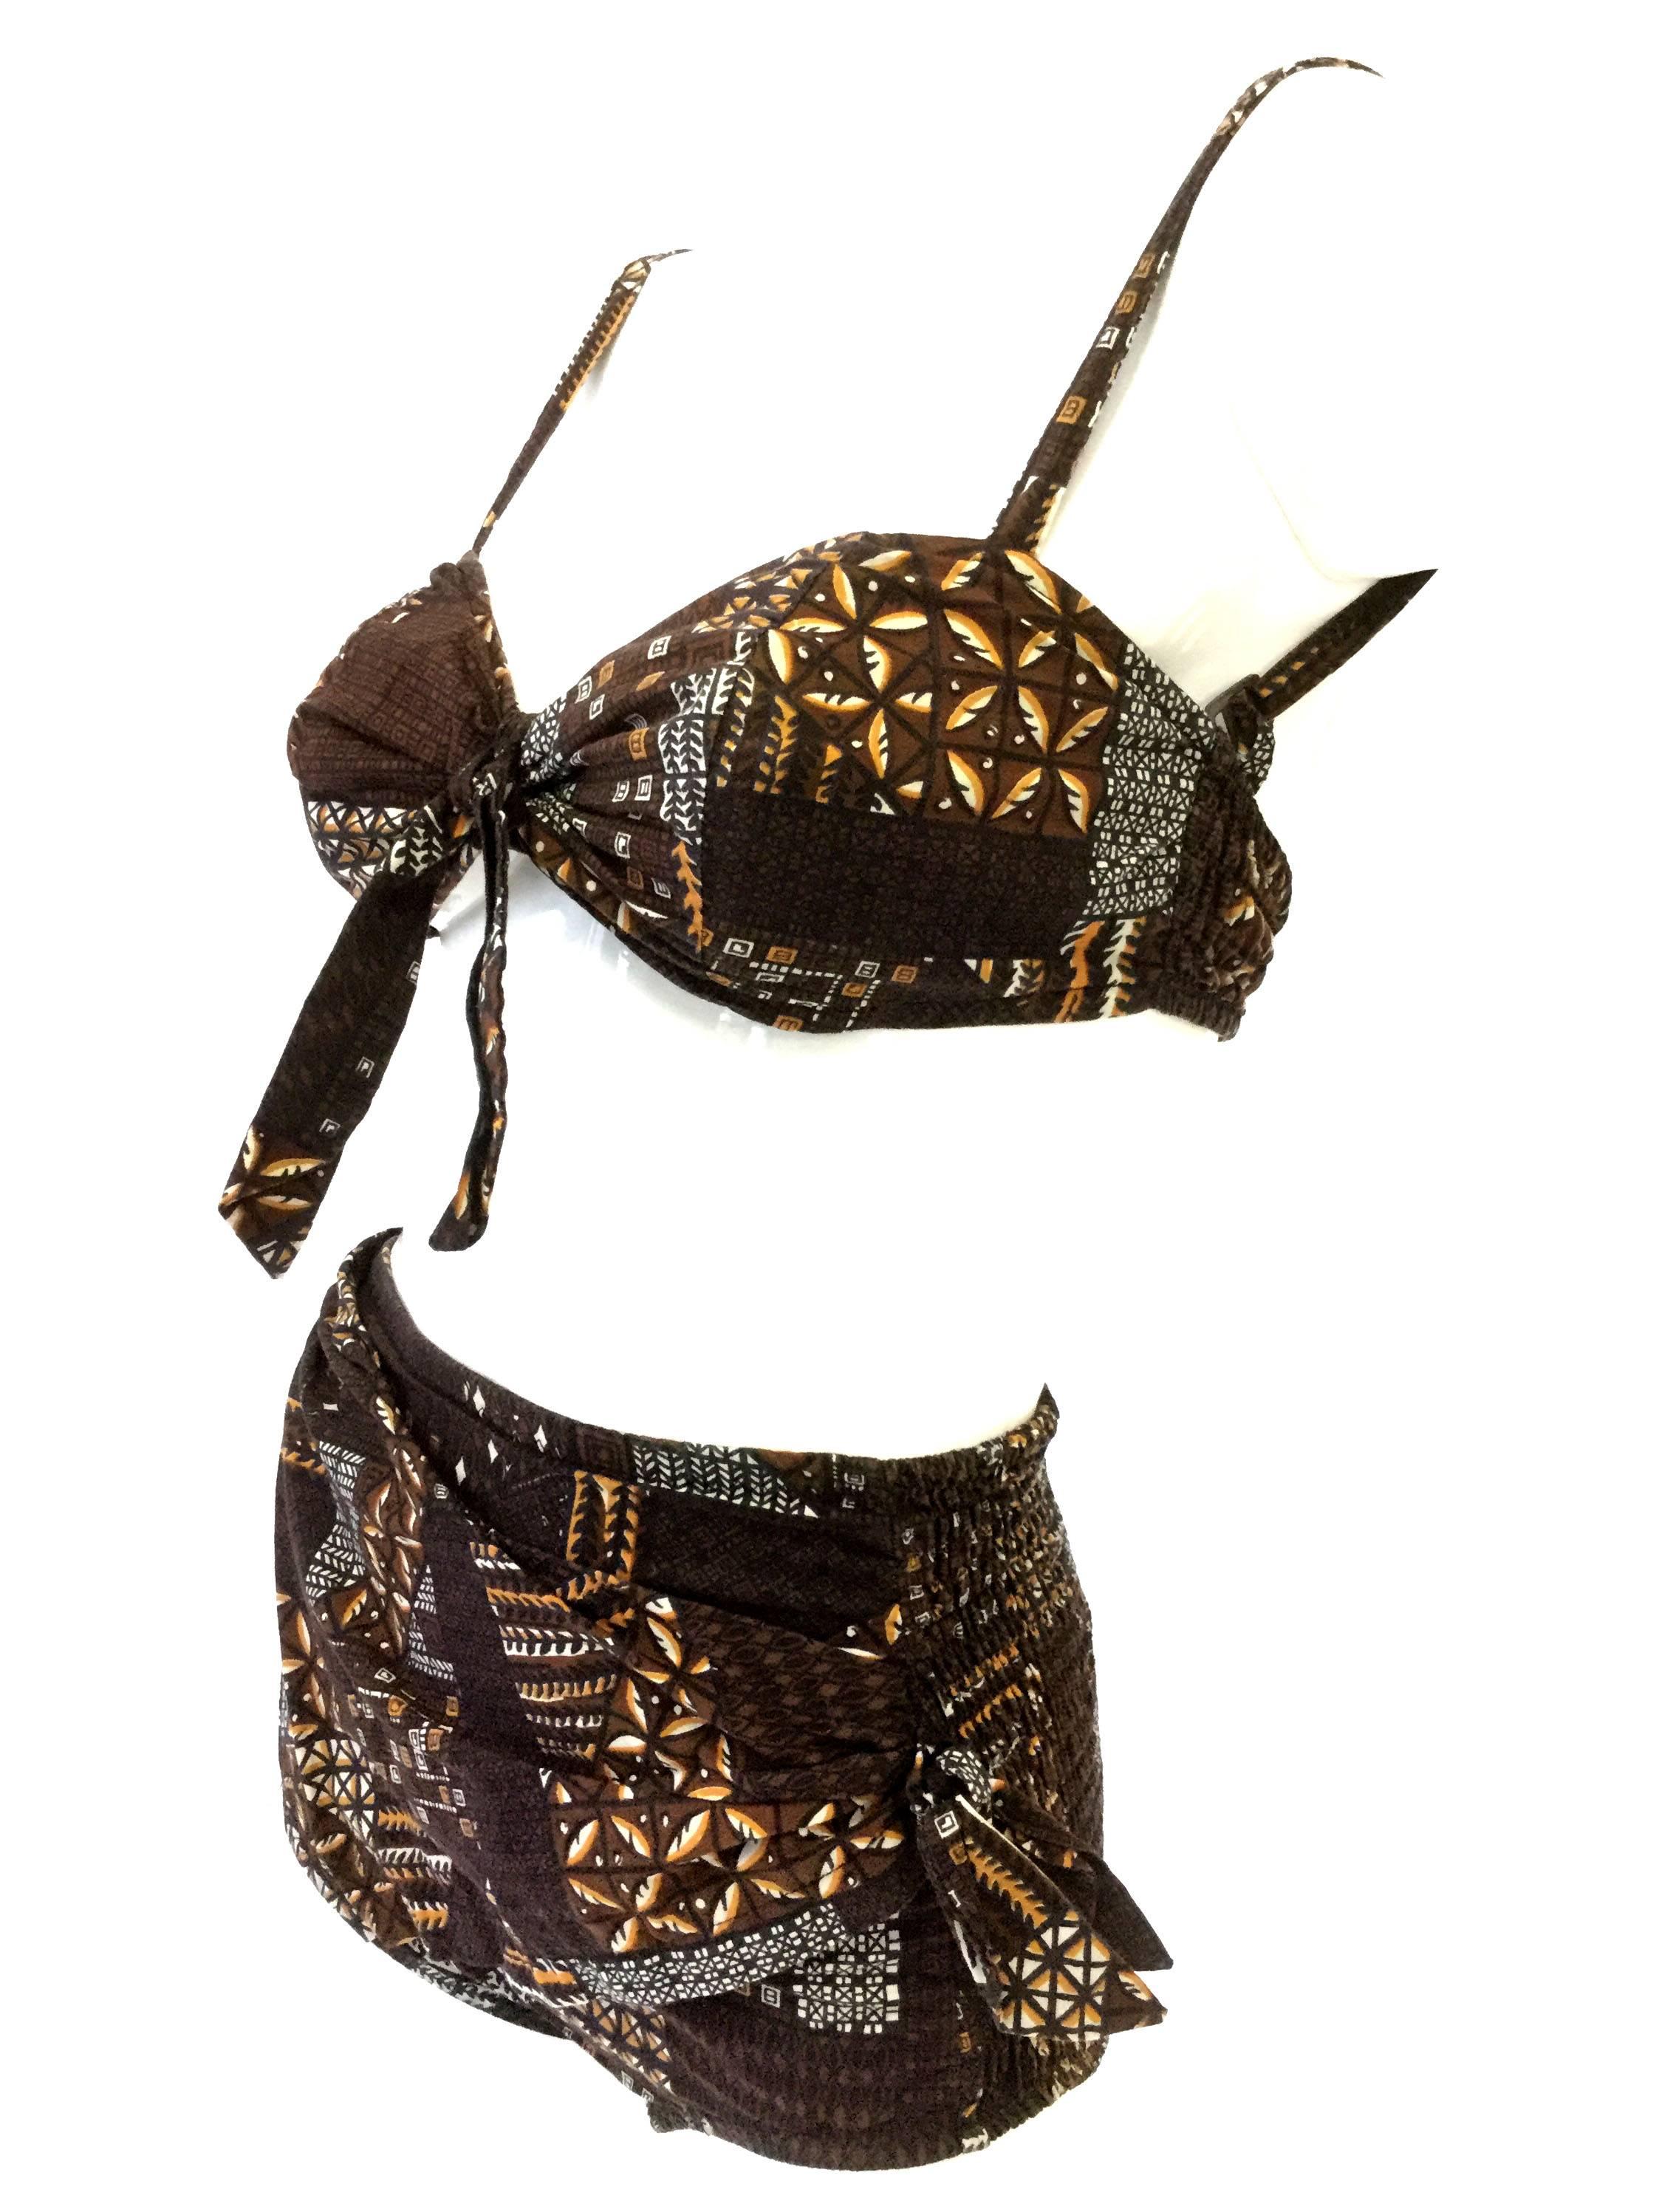 
This print bikini is an absolute dream! The high waisted boy-short bottoms have a sarong-style draped side tie, and the sweetheart bra top gathers in the middle with a relaxed bow. The bikini features a geometric batik-style print in chestnut